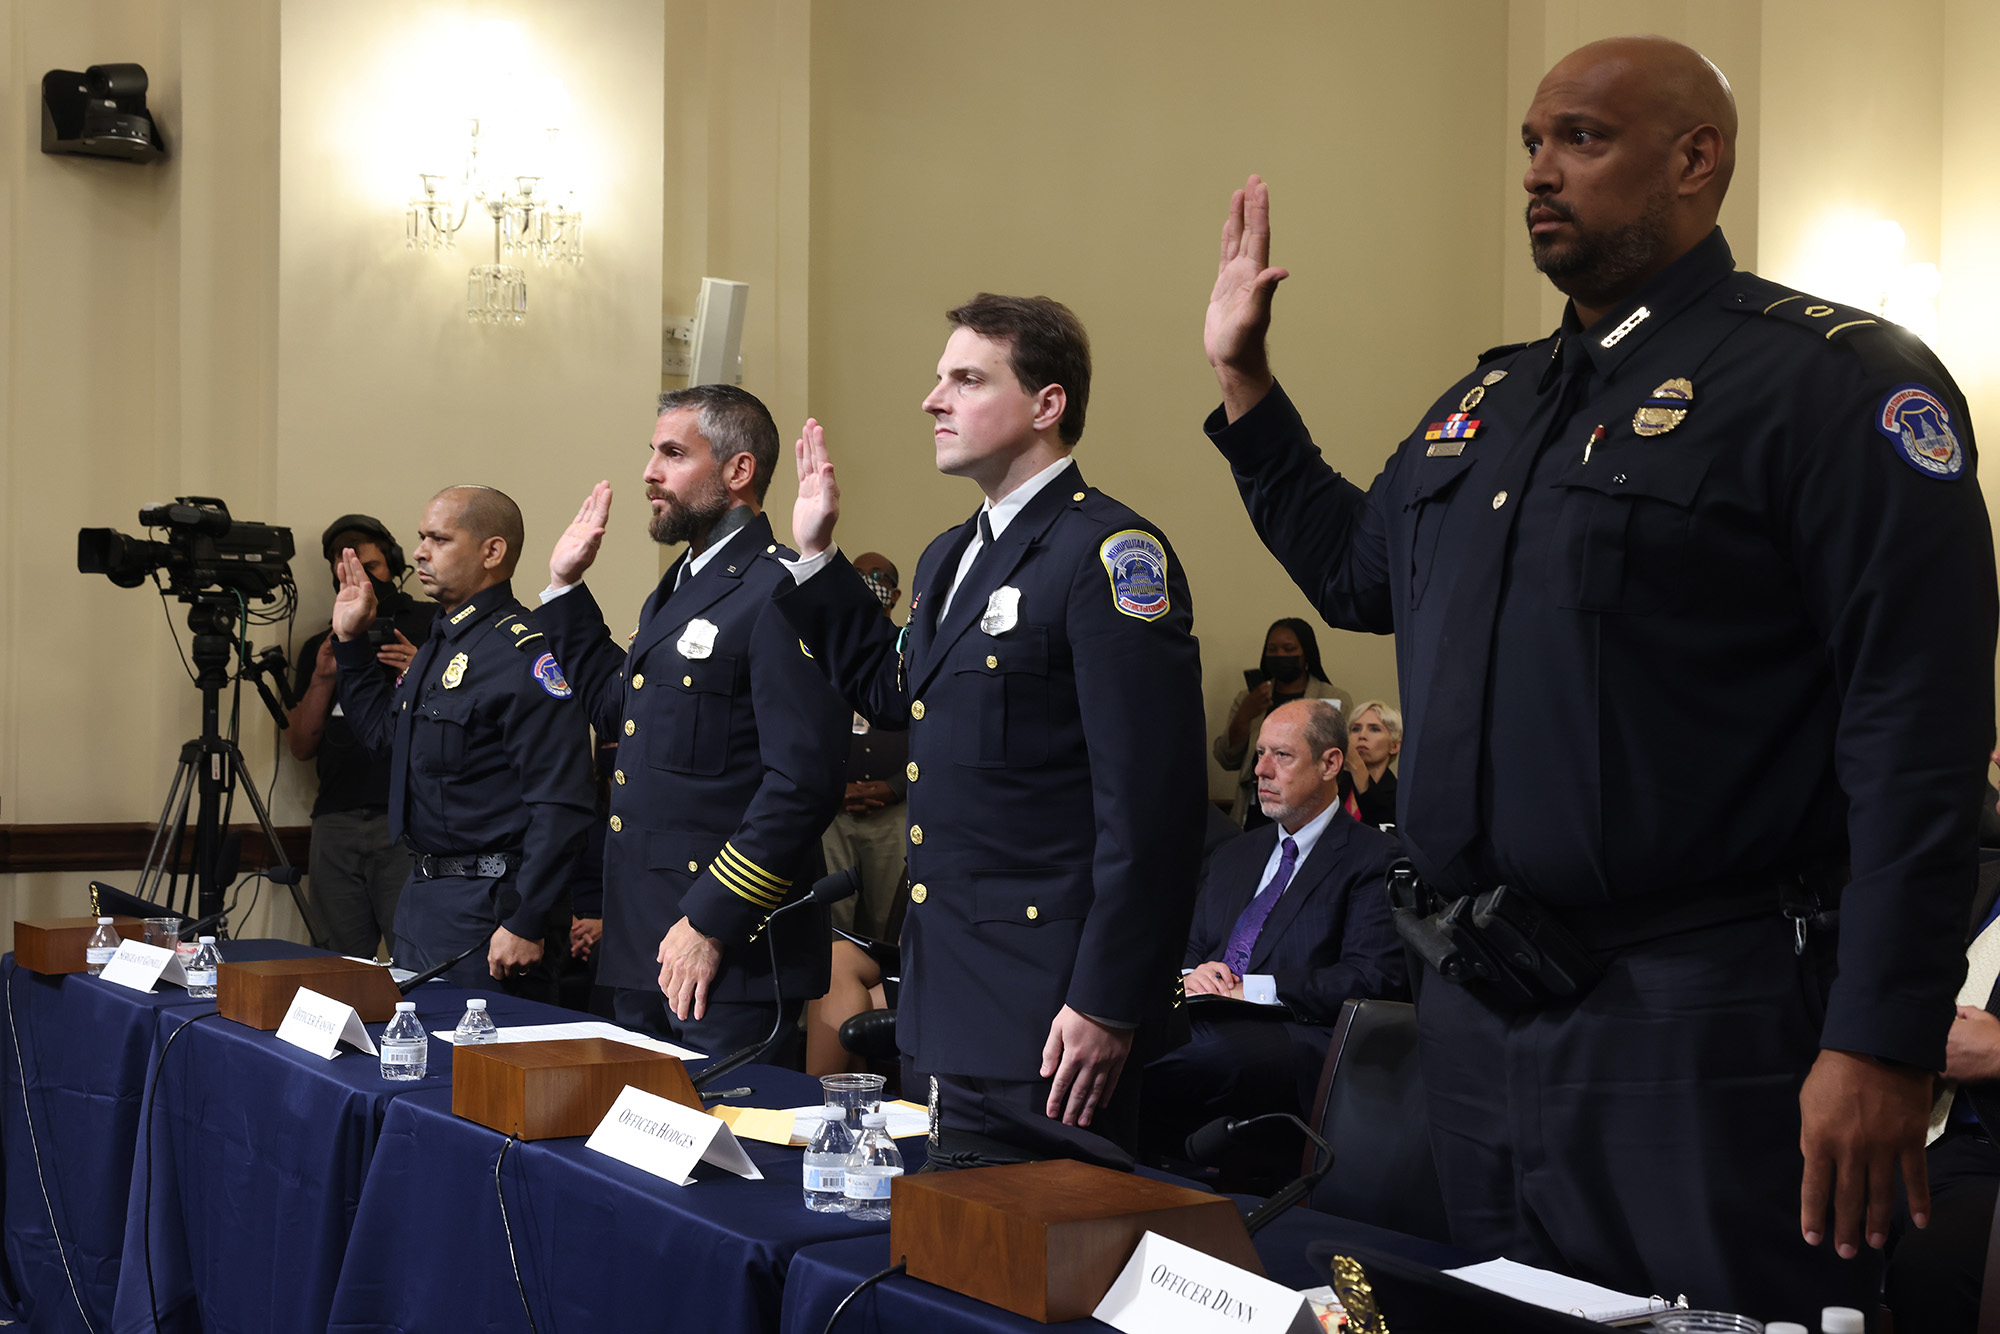 Sgt. Aquilino Gonell of the US Capitol Police, Officer Michael Fanone of the DC Metropolitan Police, Officer Daniel Hodges of the DC Metropolitan Police and Private First Class Harry Dunn of the US Capitol Police are sworn in to testify before the House Select Committee investigating the January 6 attack on the U.S. Capitol.